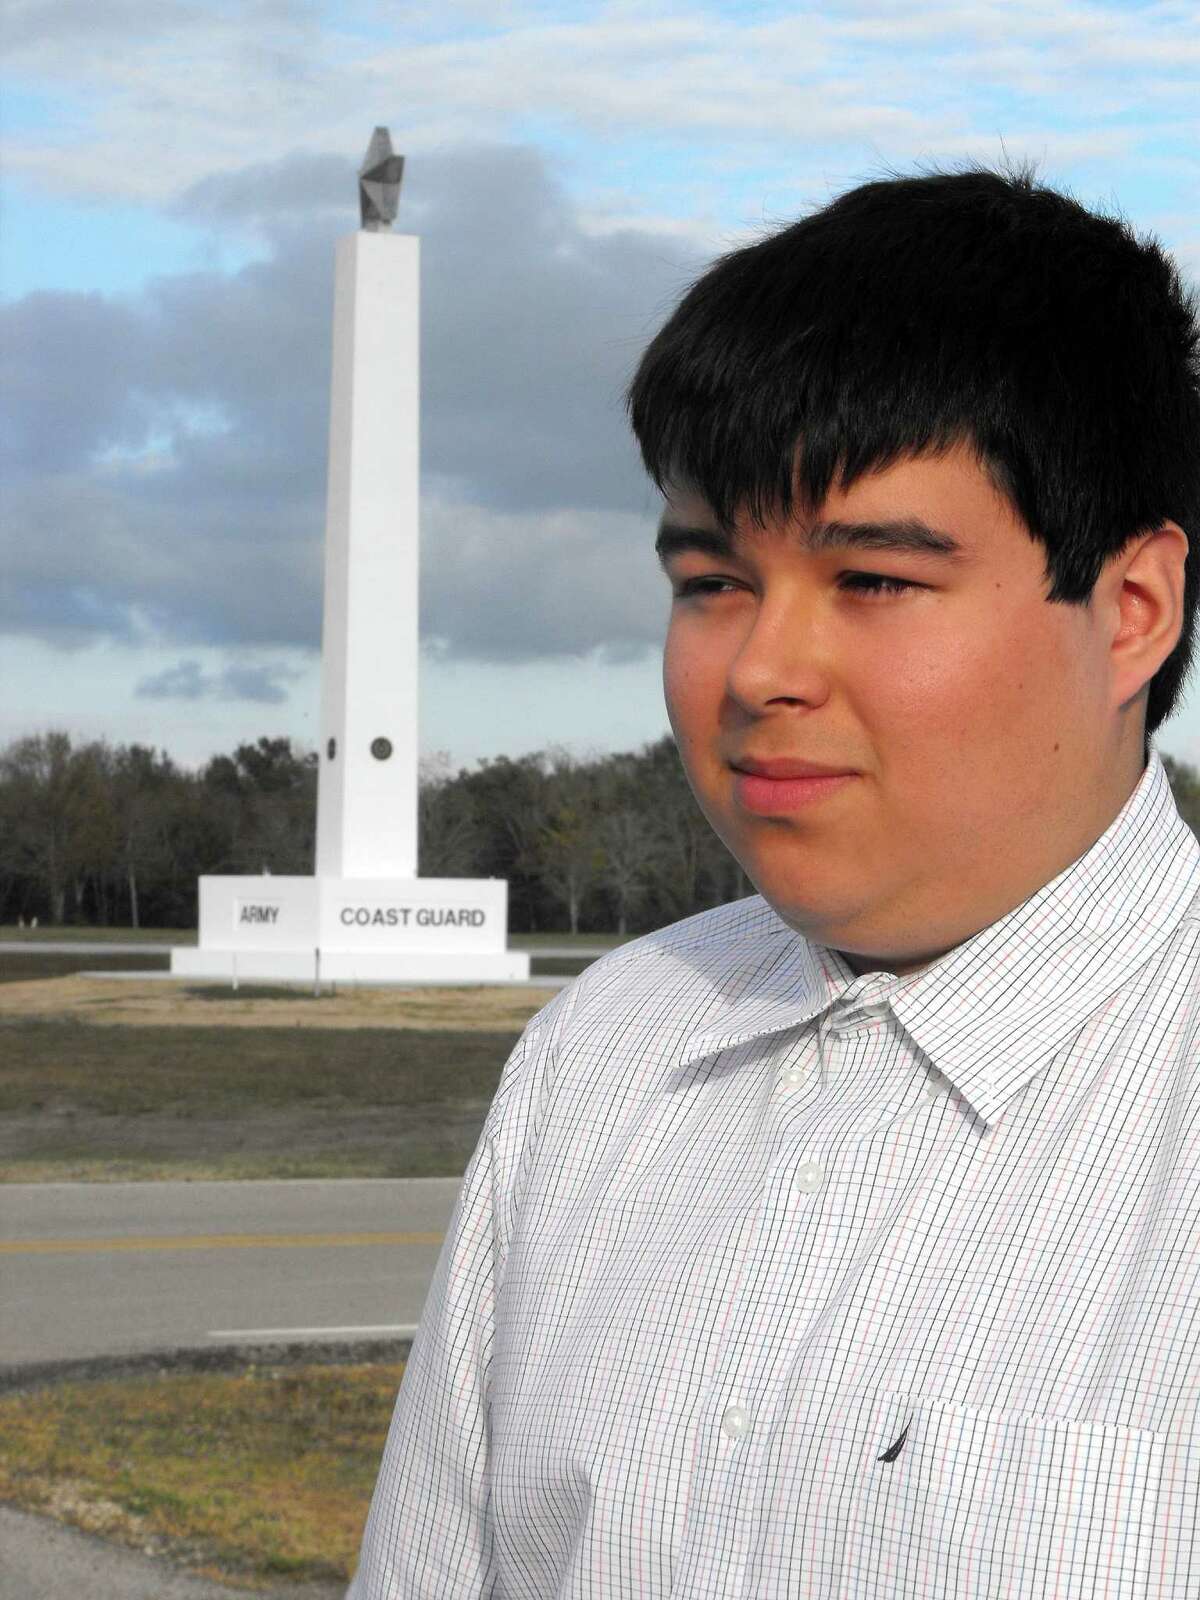 Seven Lakes High School's Carlos Vargas is one of two winners of the Katy Rotary Club's "What 9/11 Means to Our Country" essay contest, organized as part of the dedication of Freedom Tower in Freedom Park.